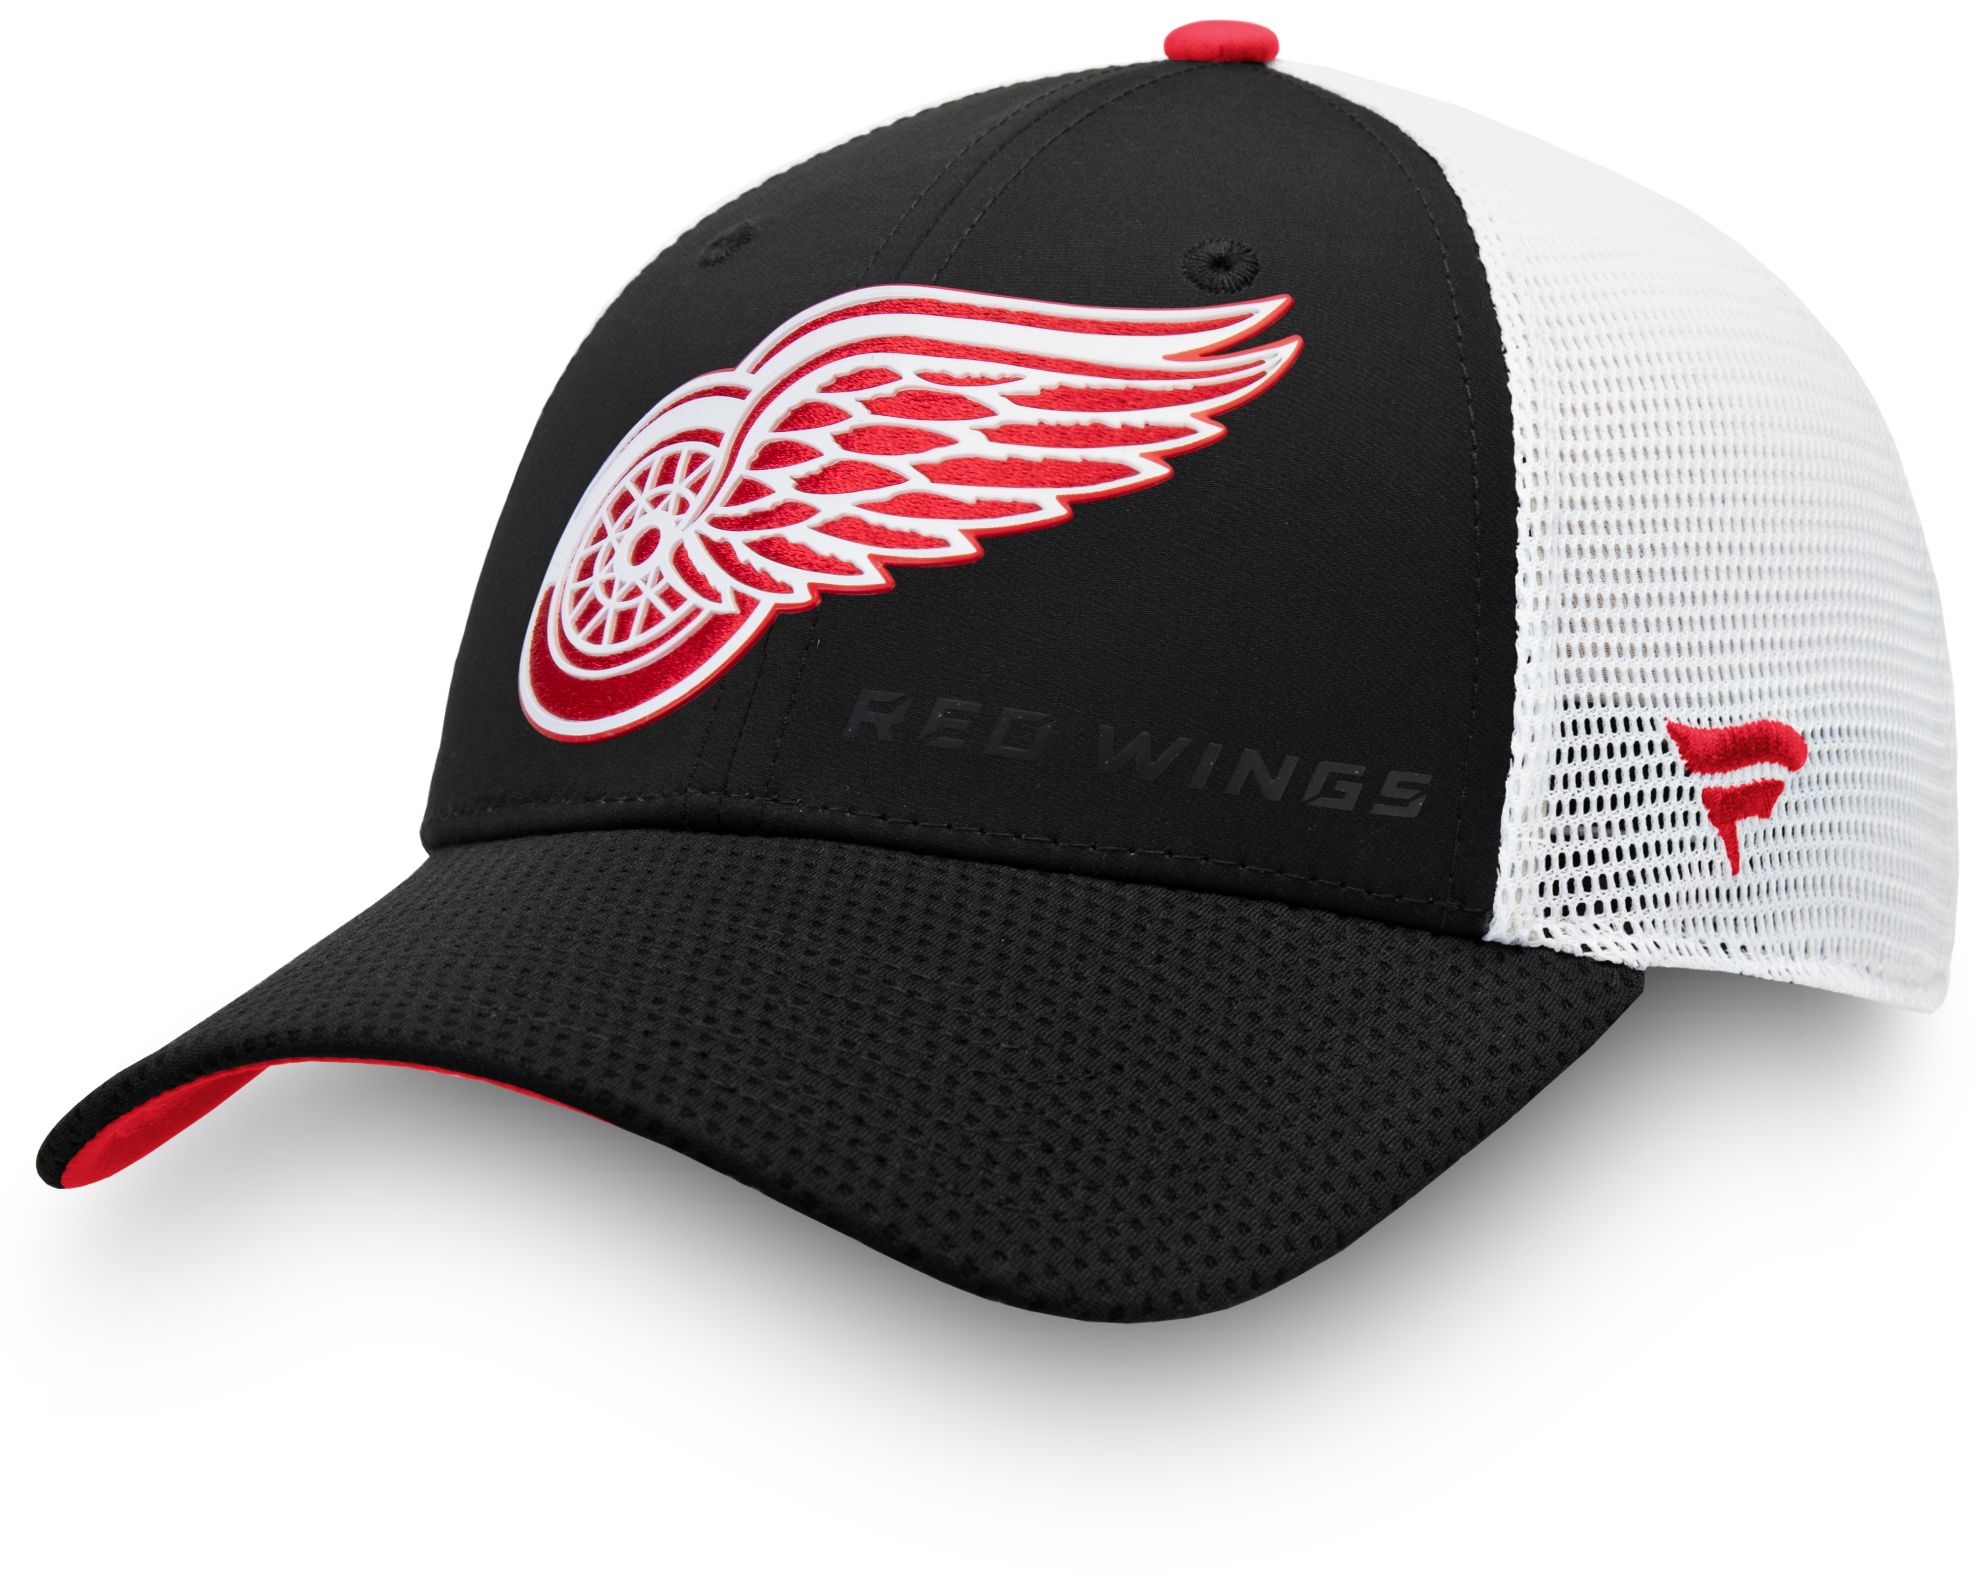 nhl red wings hat